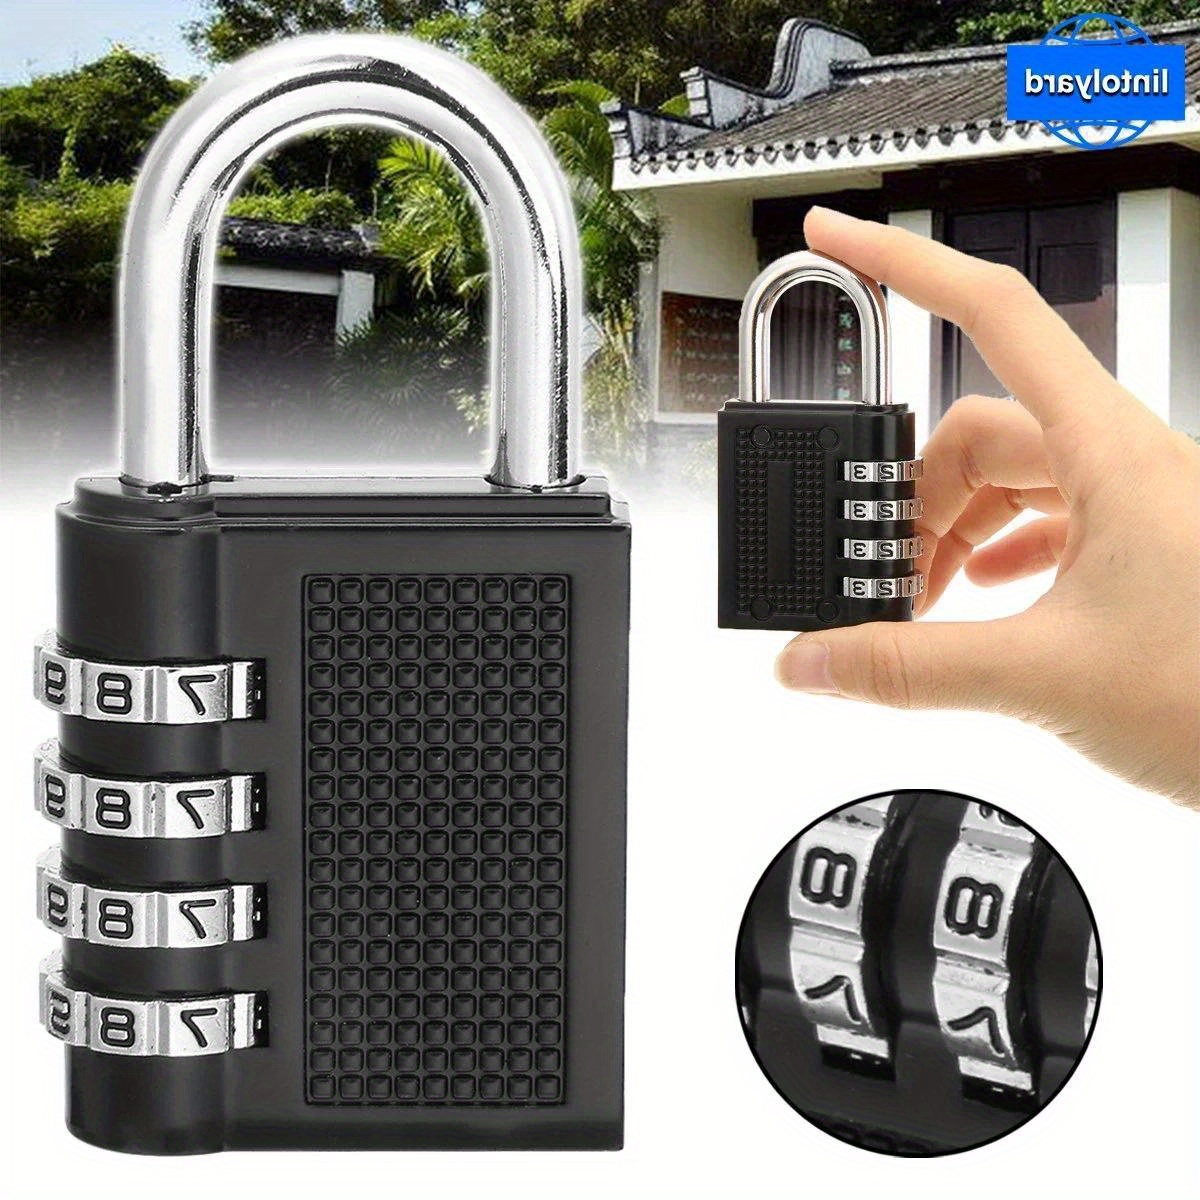 

1pc High-quality Lintolyard 4-digit Combination Lock Weatherproof Padlock For Outdoor And Gym Security